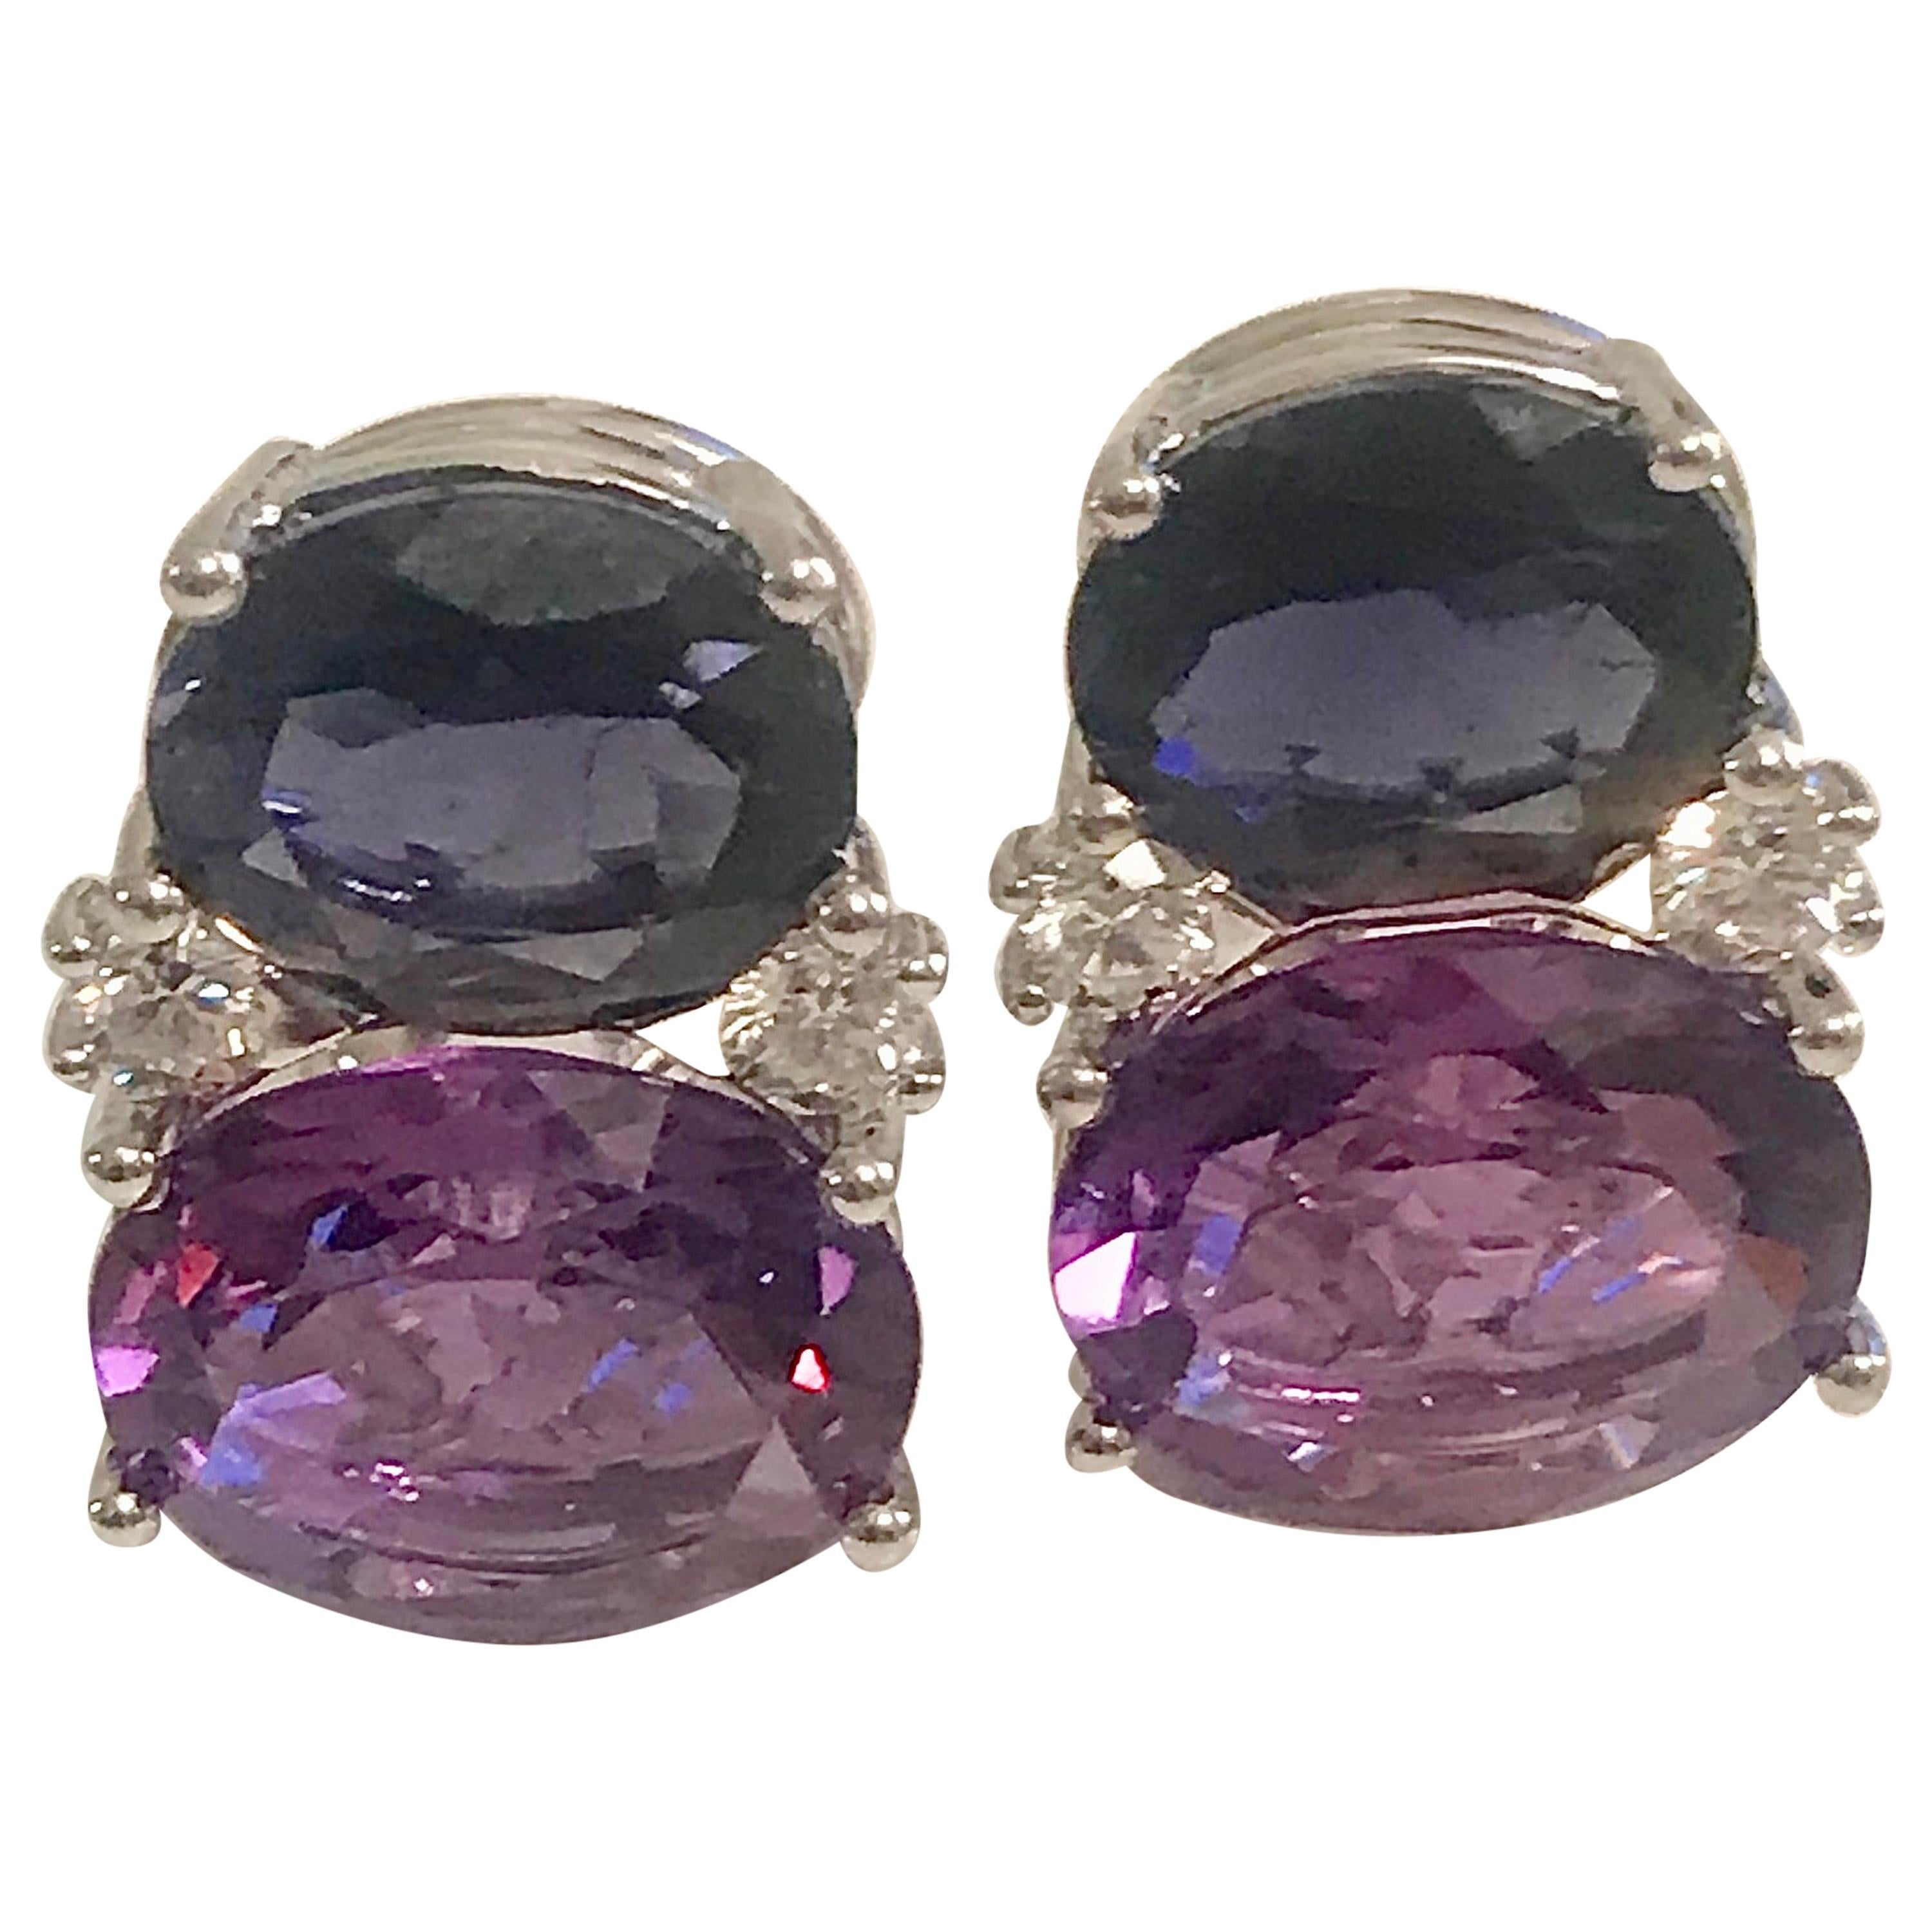 Medium Gum Drop Earrings with Iolite and Amethyst and Diamonds